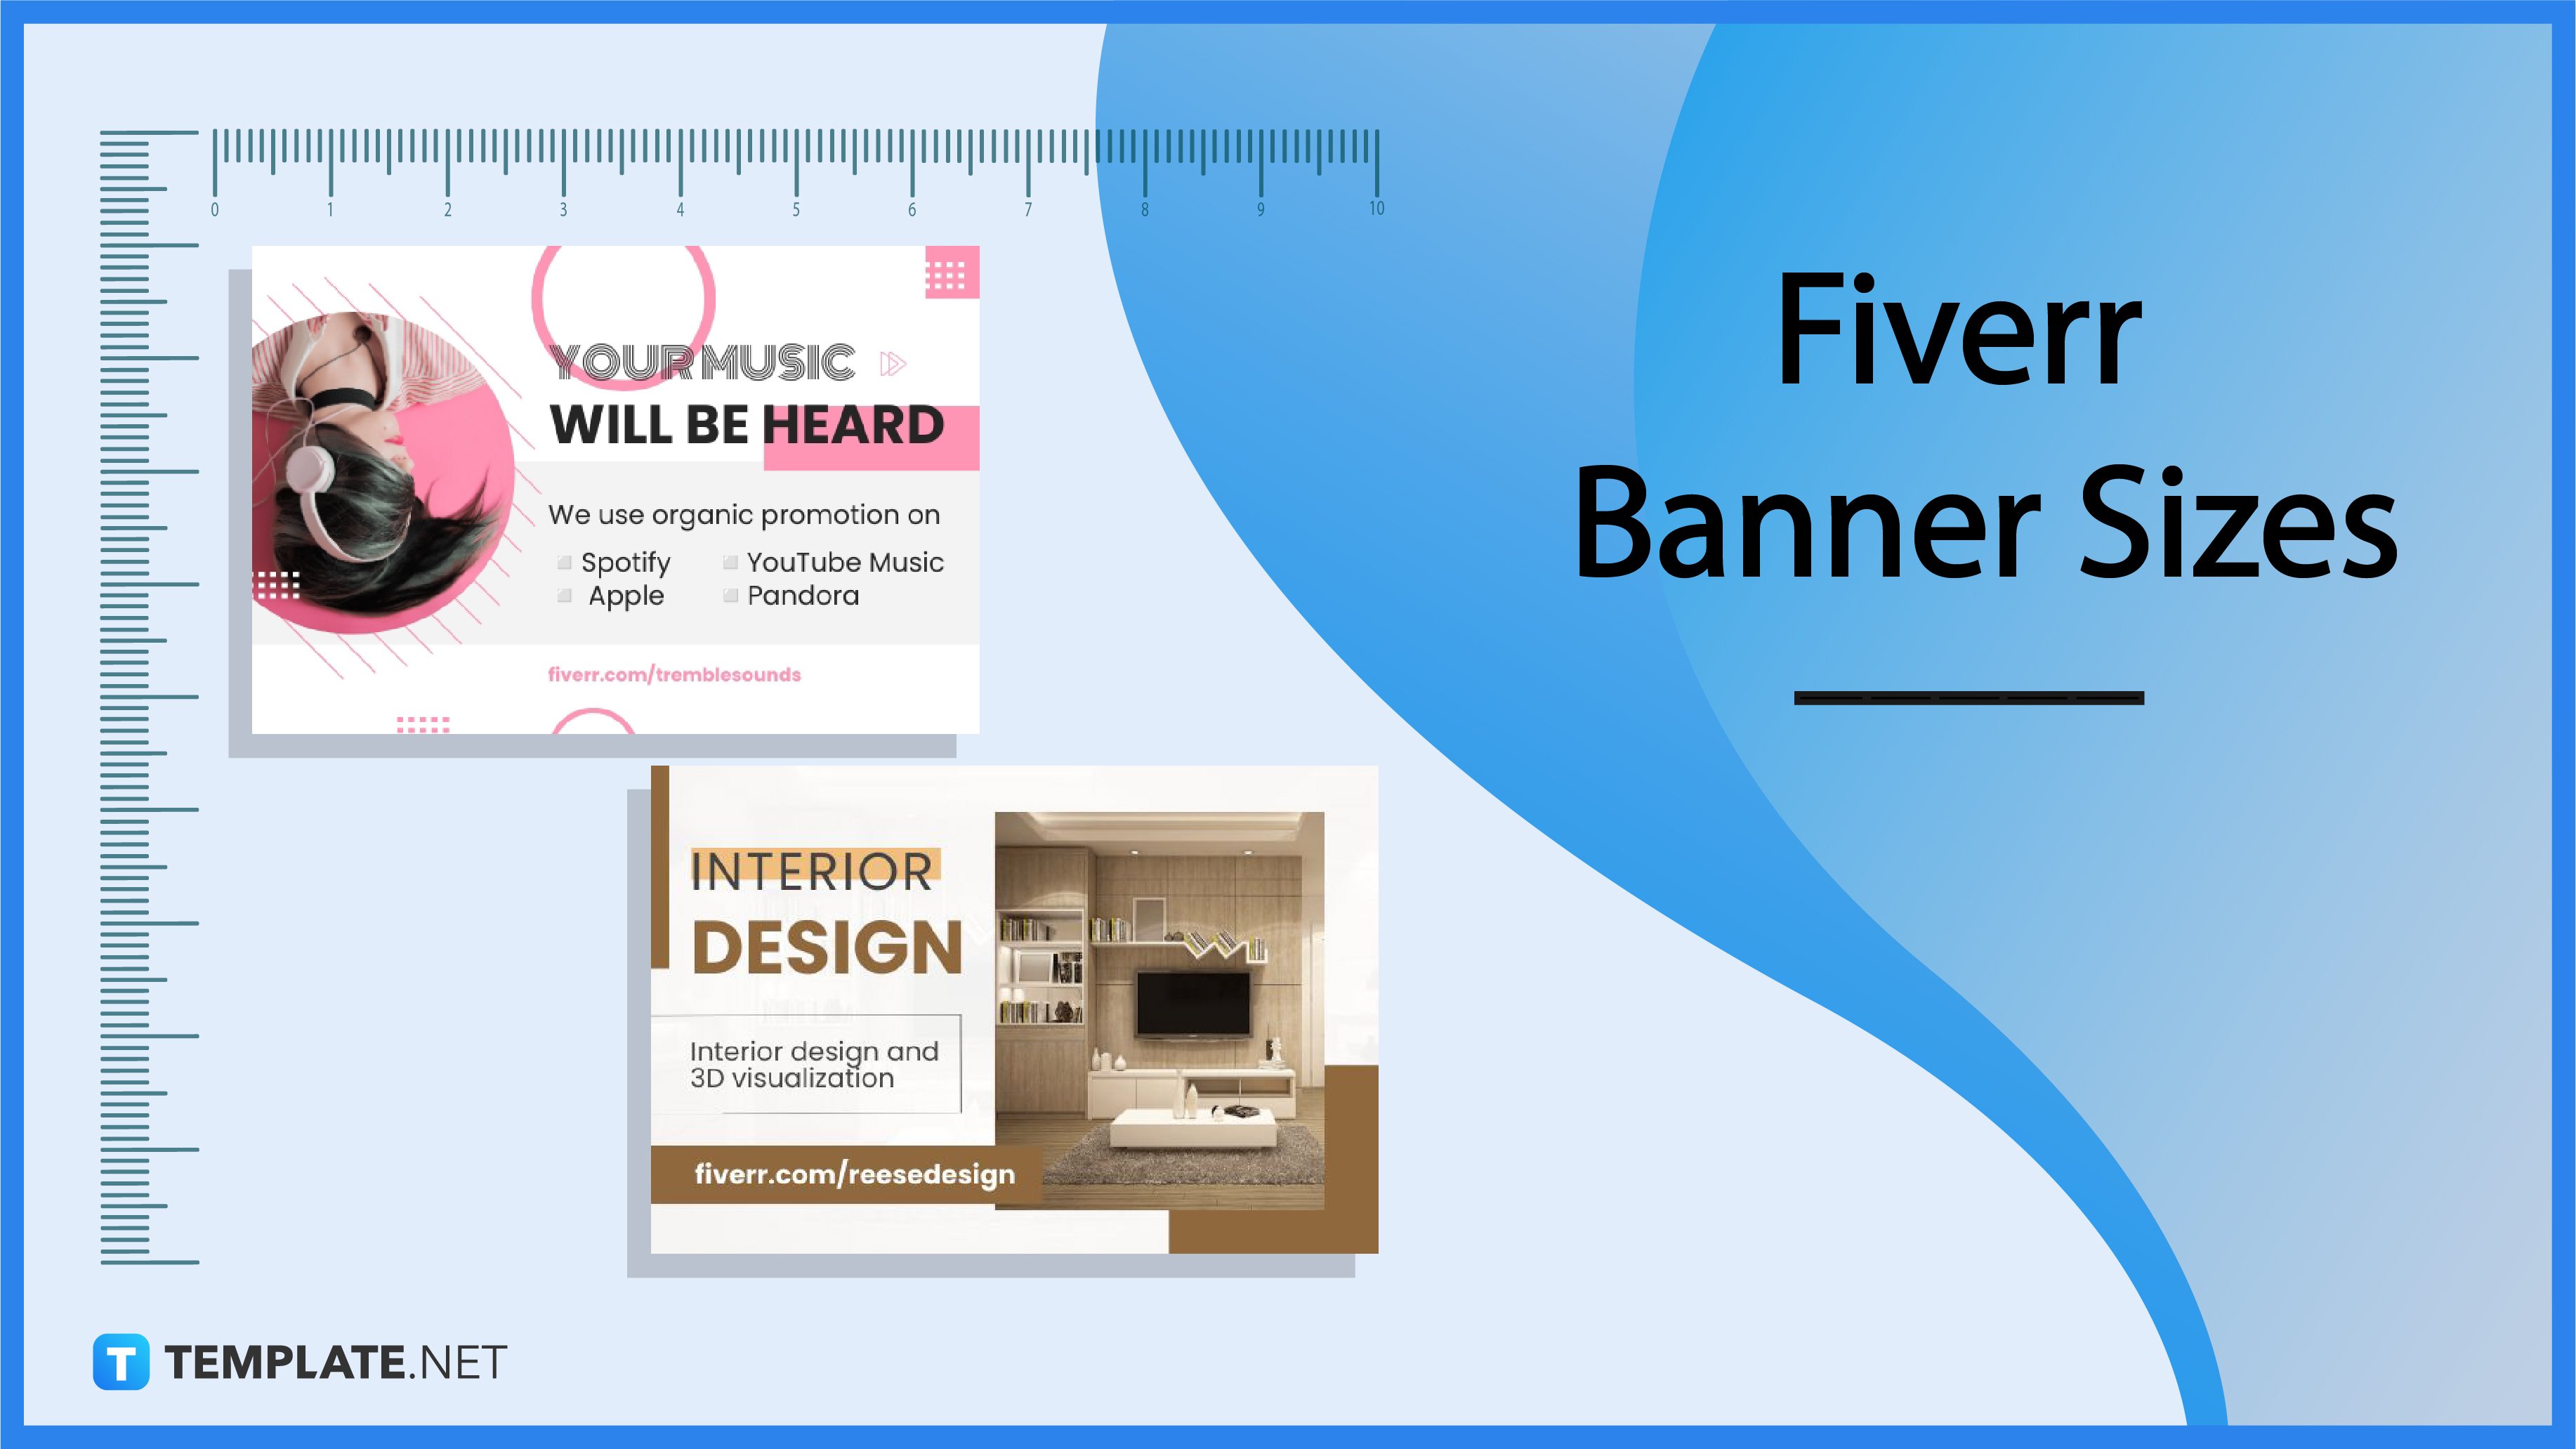 fiverr-banner-size-dimension-inches-mm-cms-pixel